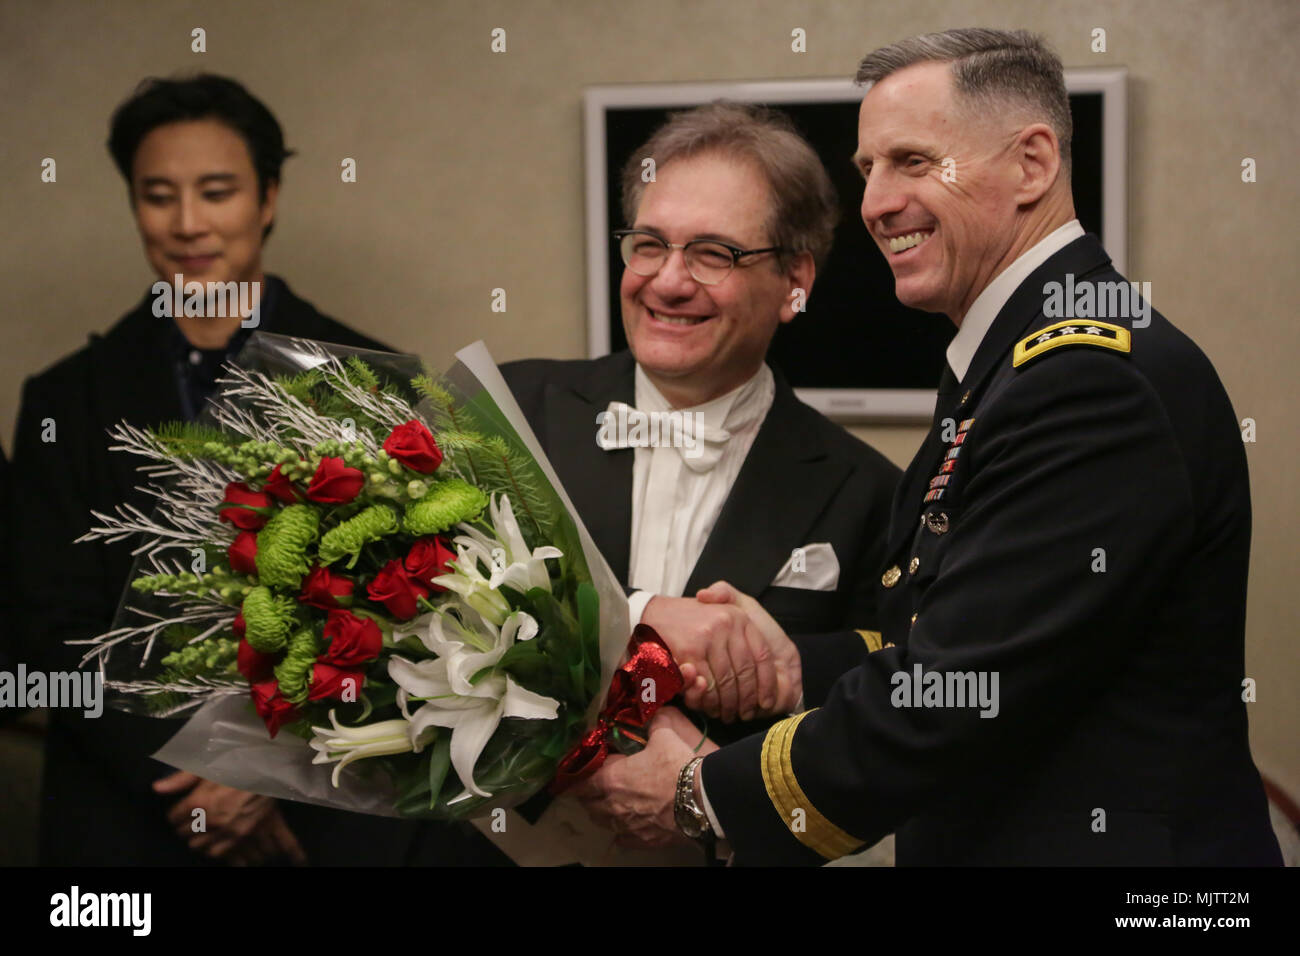 U.S Army Lt. Gen. Thomas S. Vandal commander of the Eighth army, presents flowers to Carl Palleschi after the Holiday concert in Seoul, Korea Dec. 17, 2017. The concert was hosted by the Eighth Army command in conjunction with local community leaders during the holiday season to promote harmonious relations between the U.S. Army and the Republic of Korea (ROK). Over 1500 U.S. Soldiers and ROK soldiers attended performances by the Eighth Army Band and the Prime Philharmonic Orchestra . (U.S. Army photo by Pfc. Edward Randolph)Randolph) Stock Photo